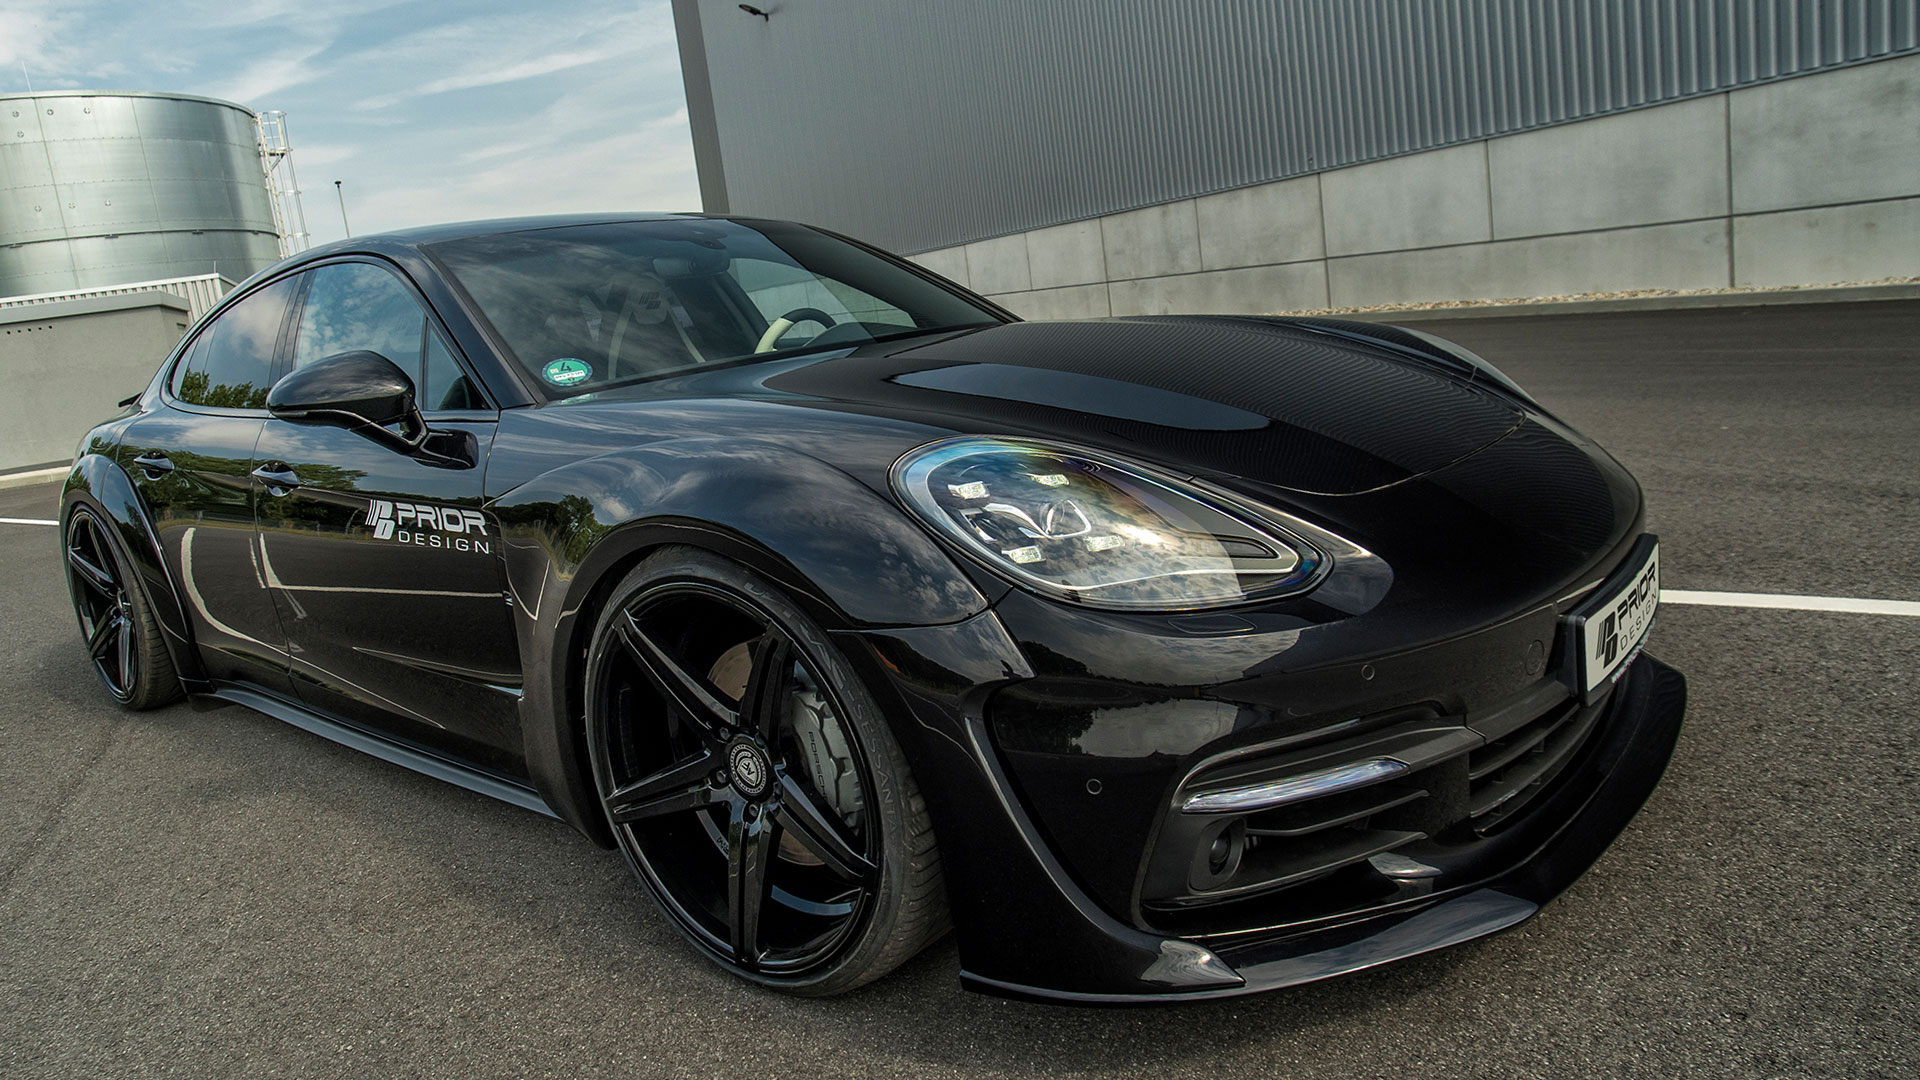 PD971 Widebody Front Widenings for Porsche Panamera 971